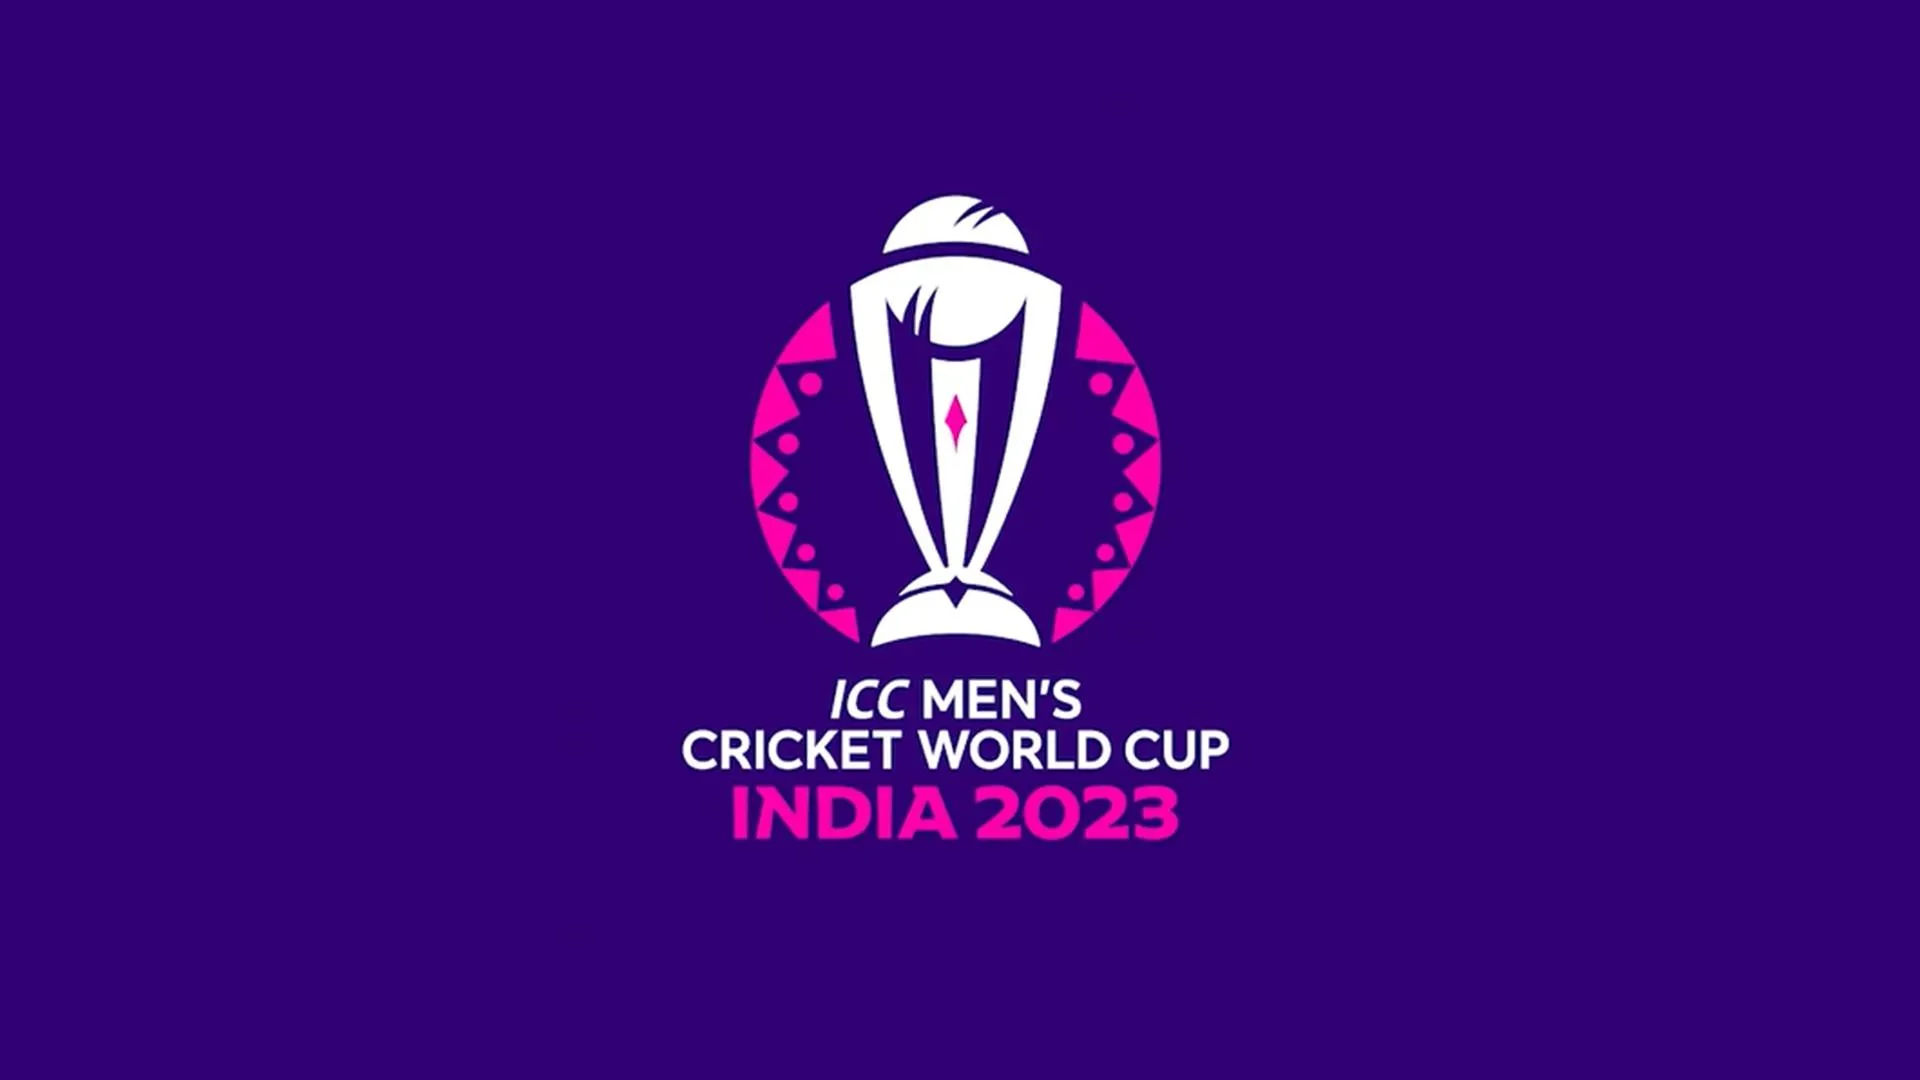 Here Is The Difference In The Ticket Prices Between The 2019 and 2023 ICC Cricket World Cup